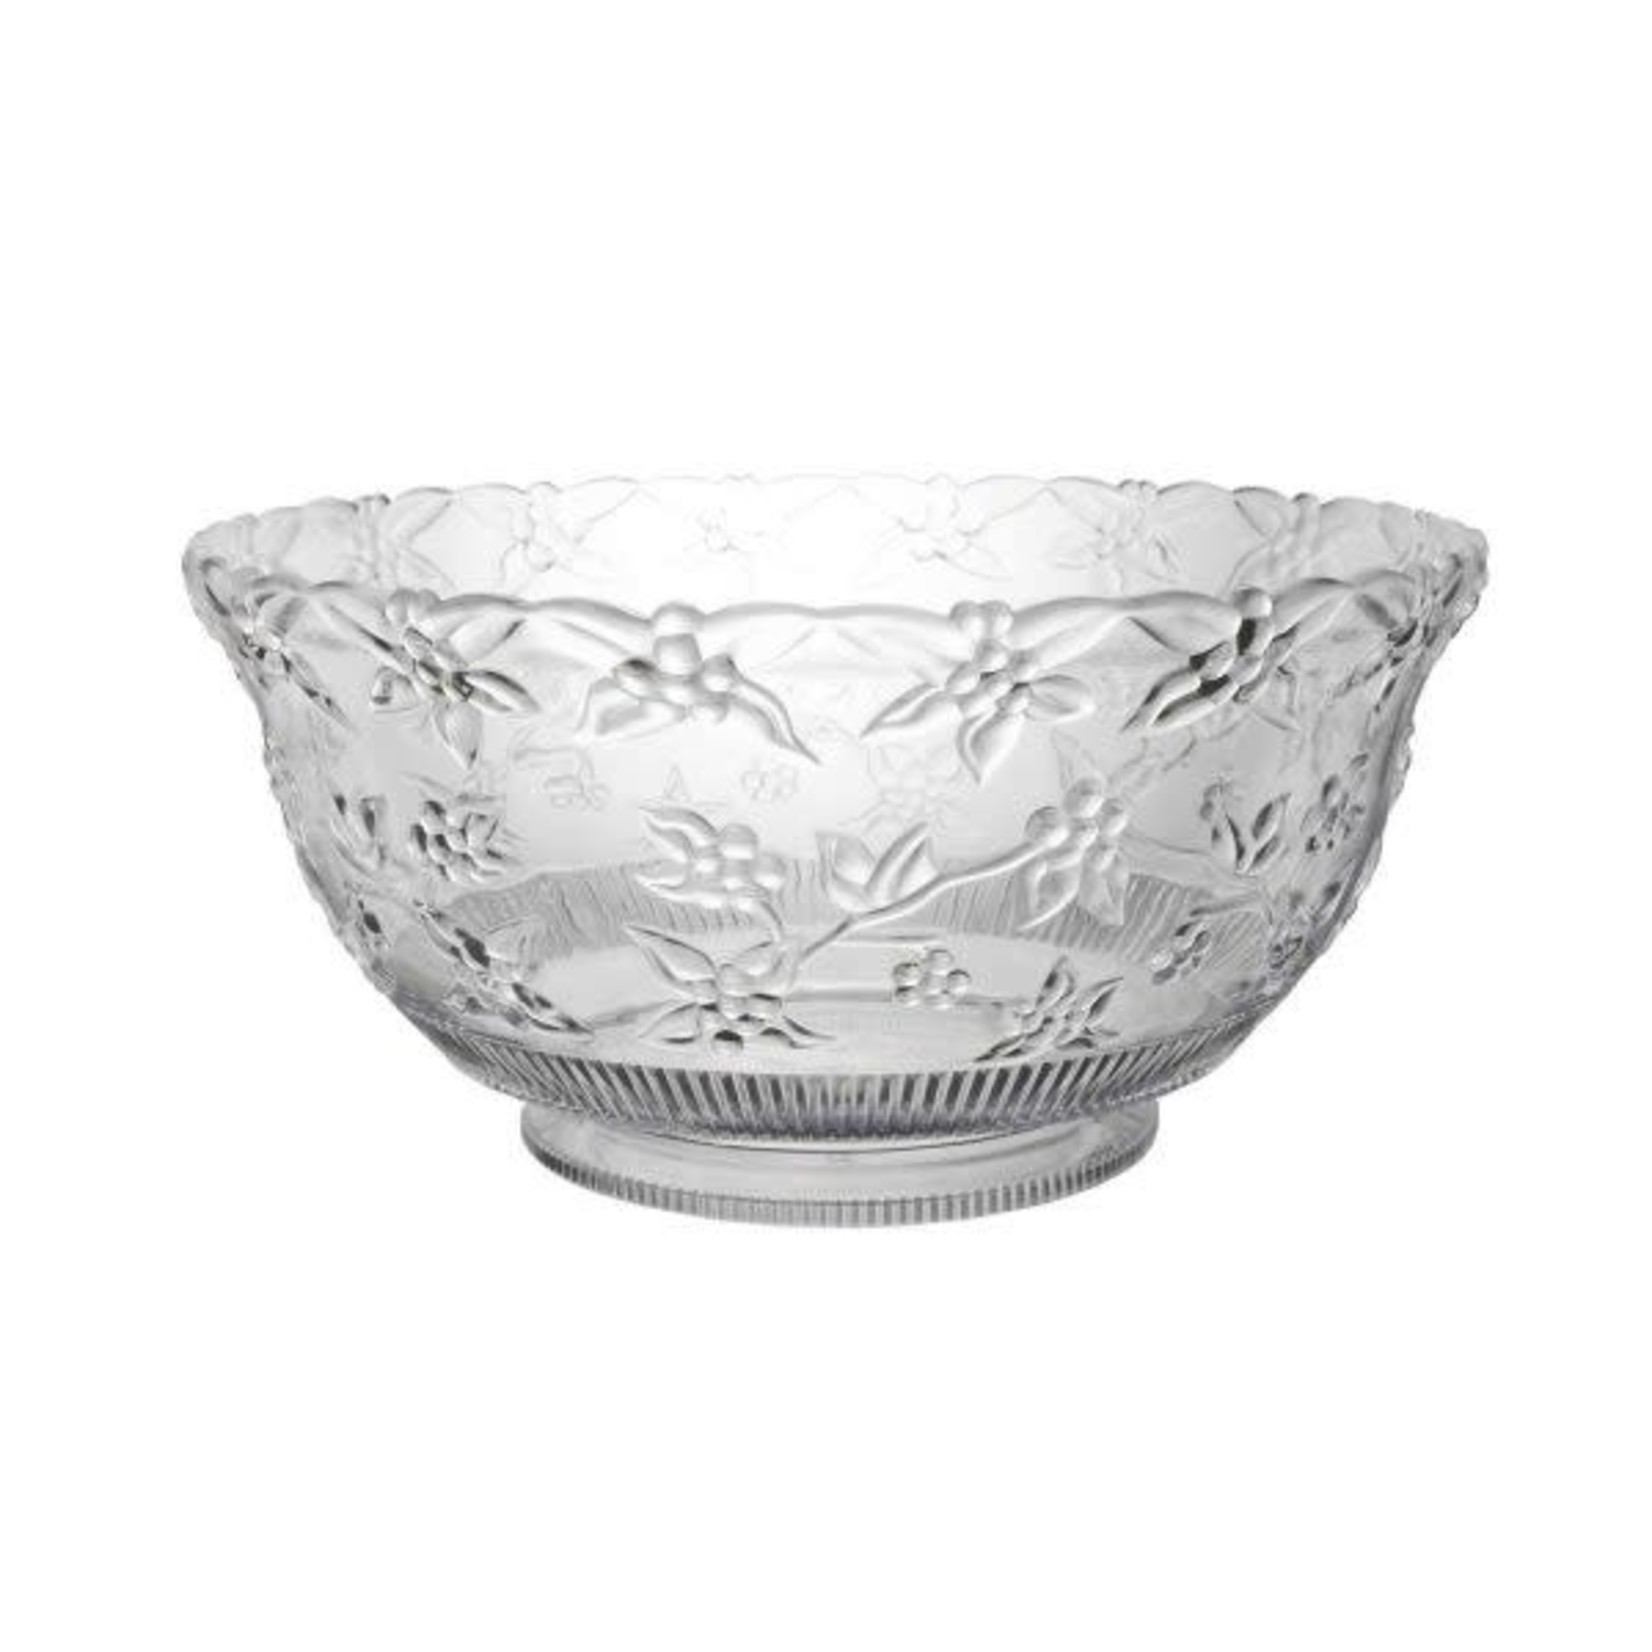 northwest Clear Floral Embossed Punch Bowl - 8qt.